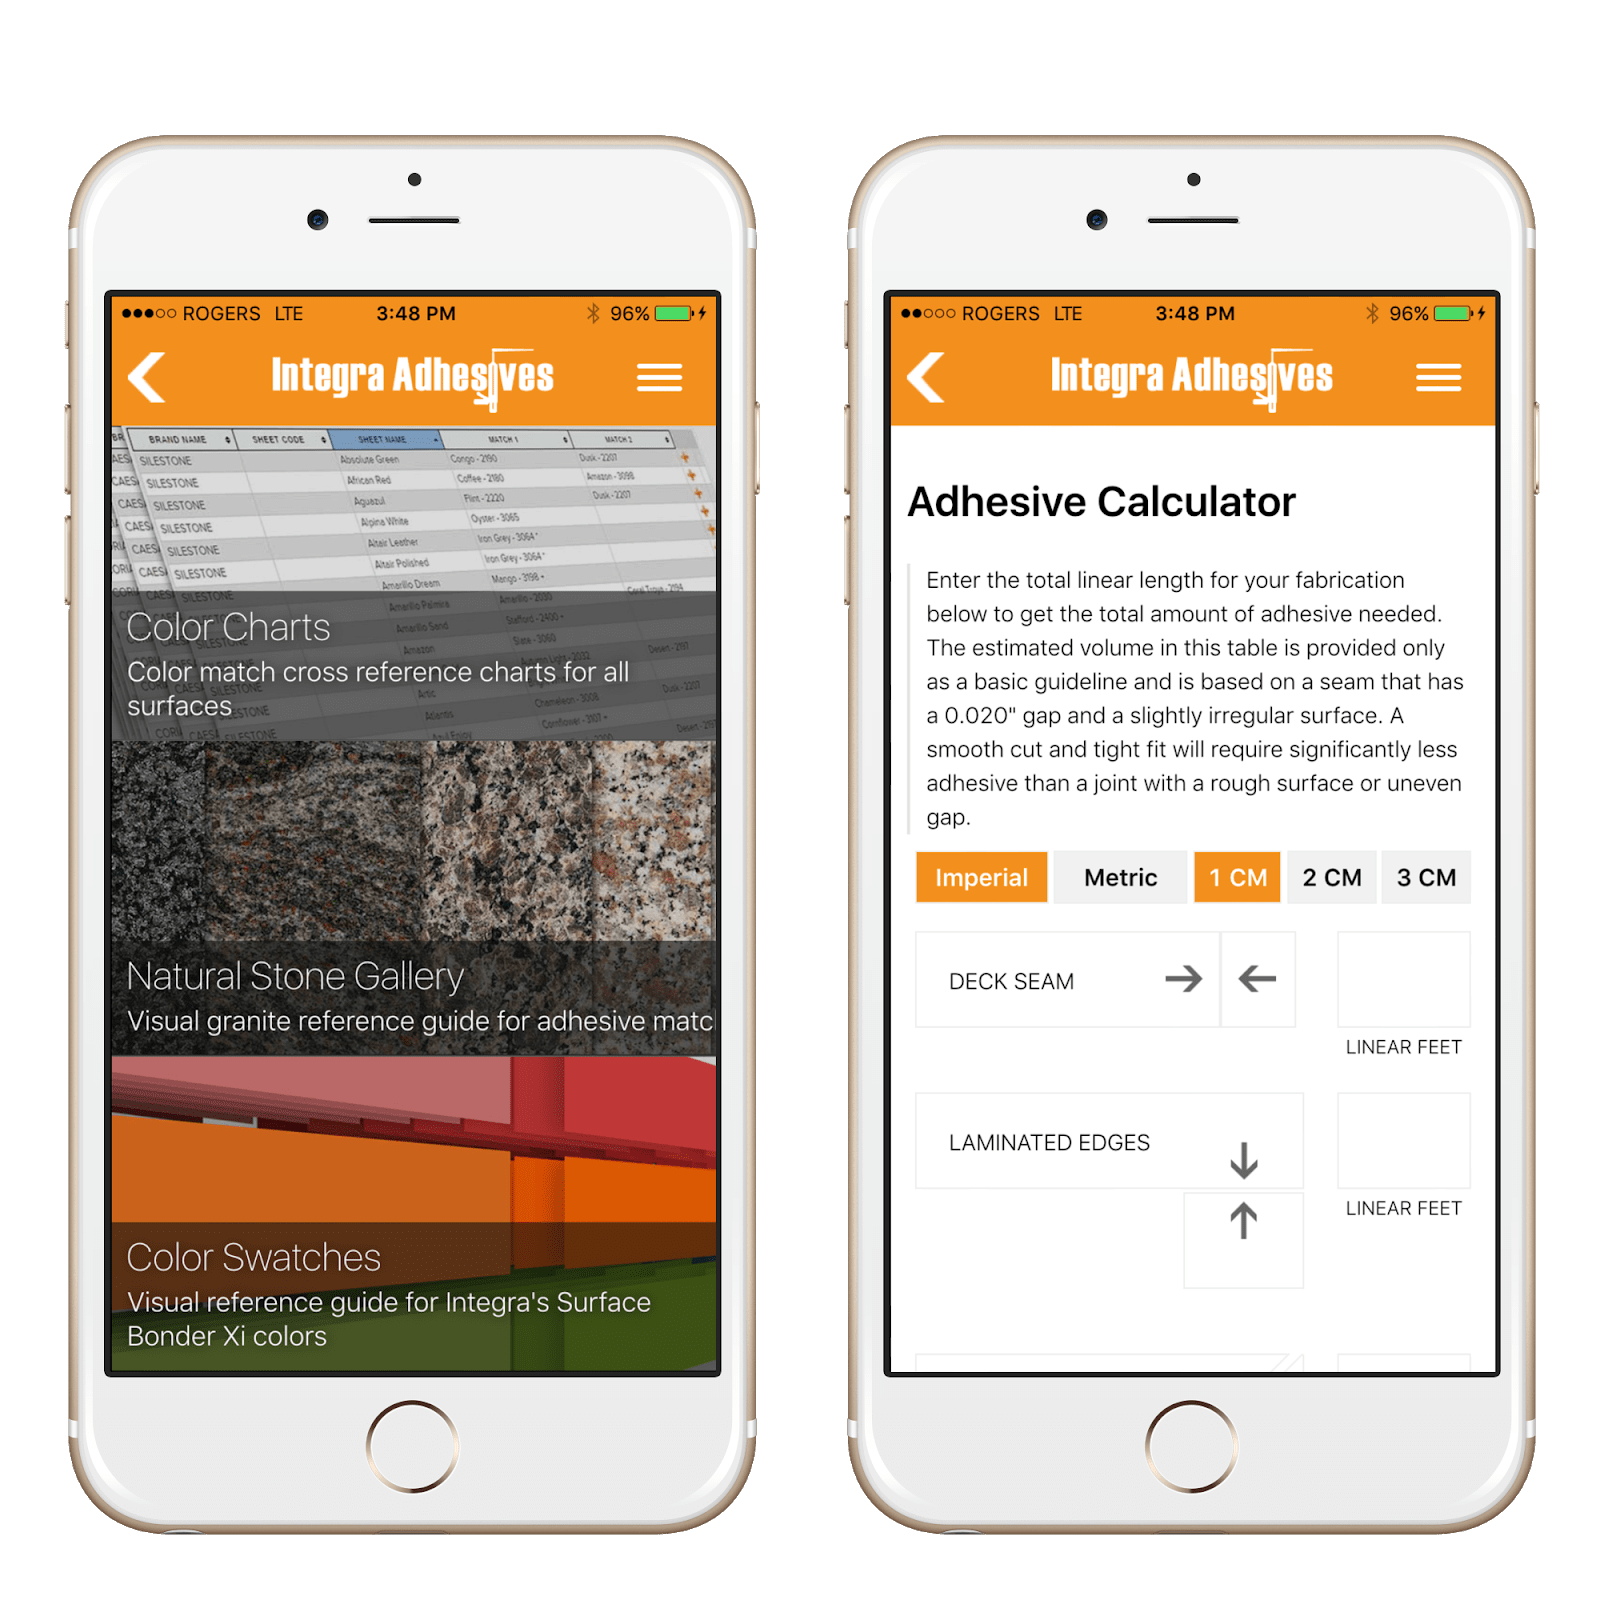 Info Grove App Integra Adhesives feature page and calculator